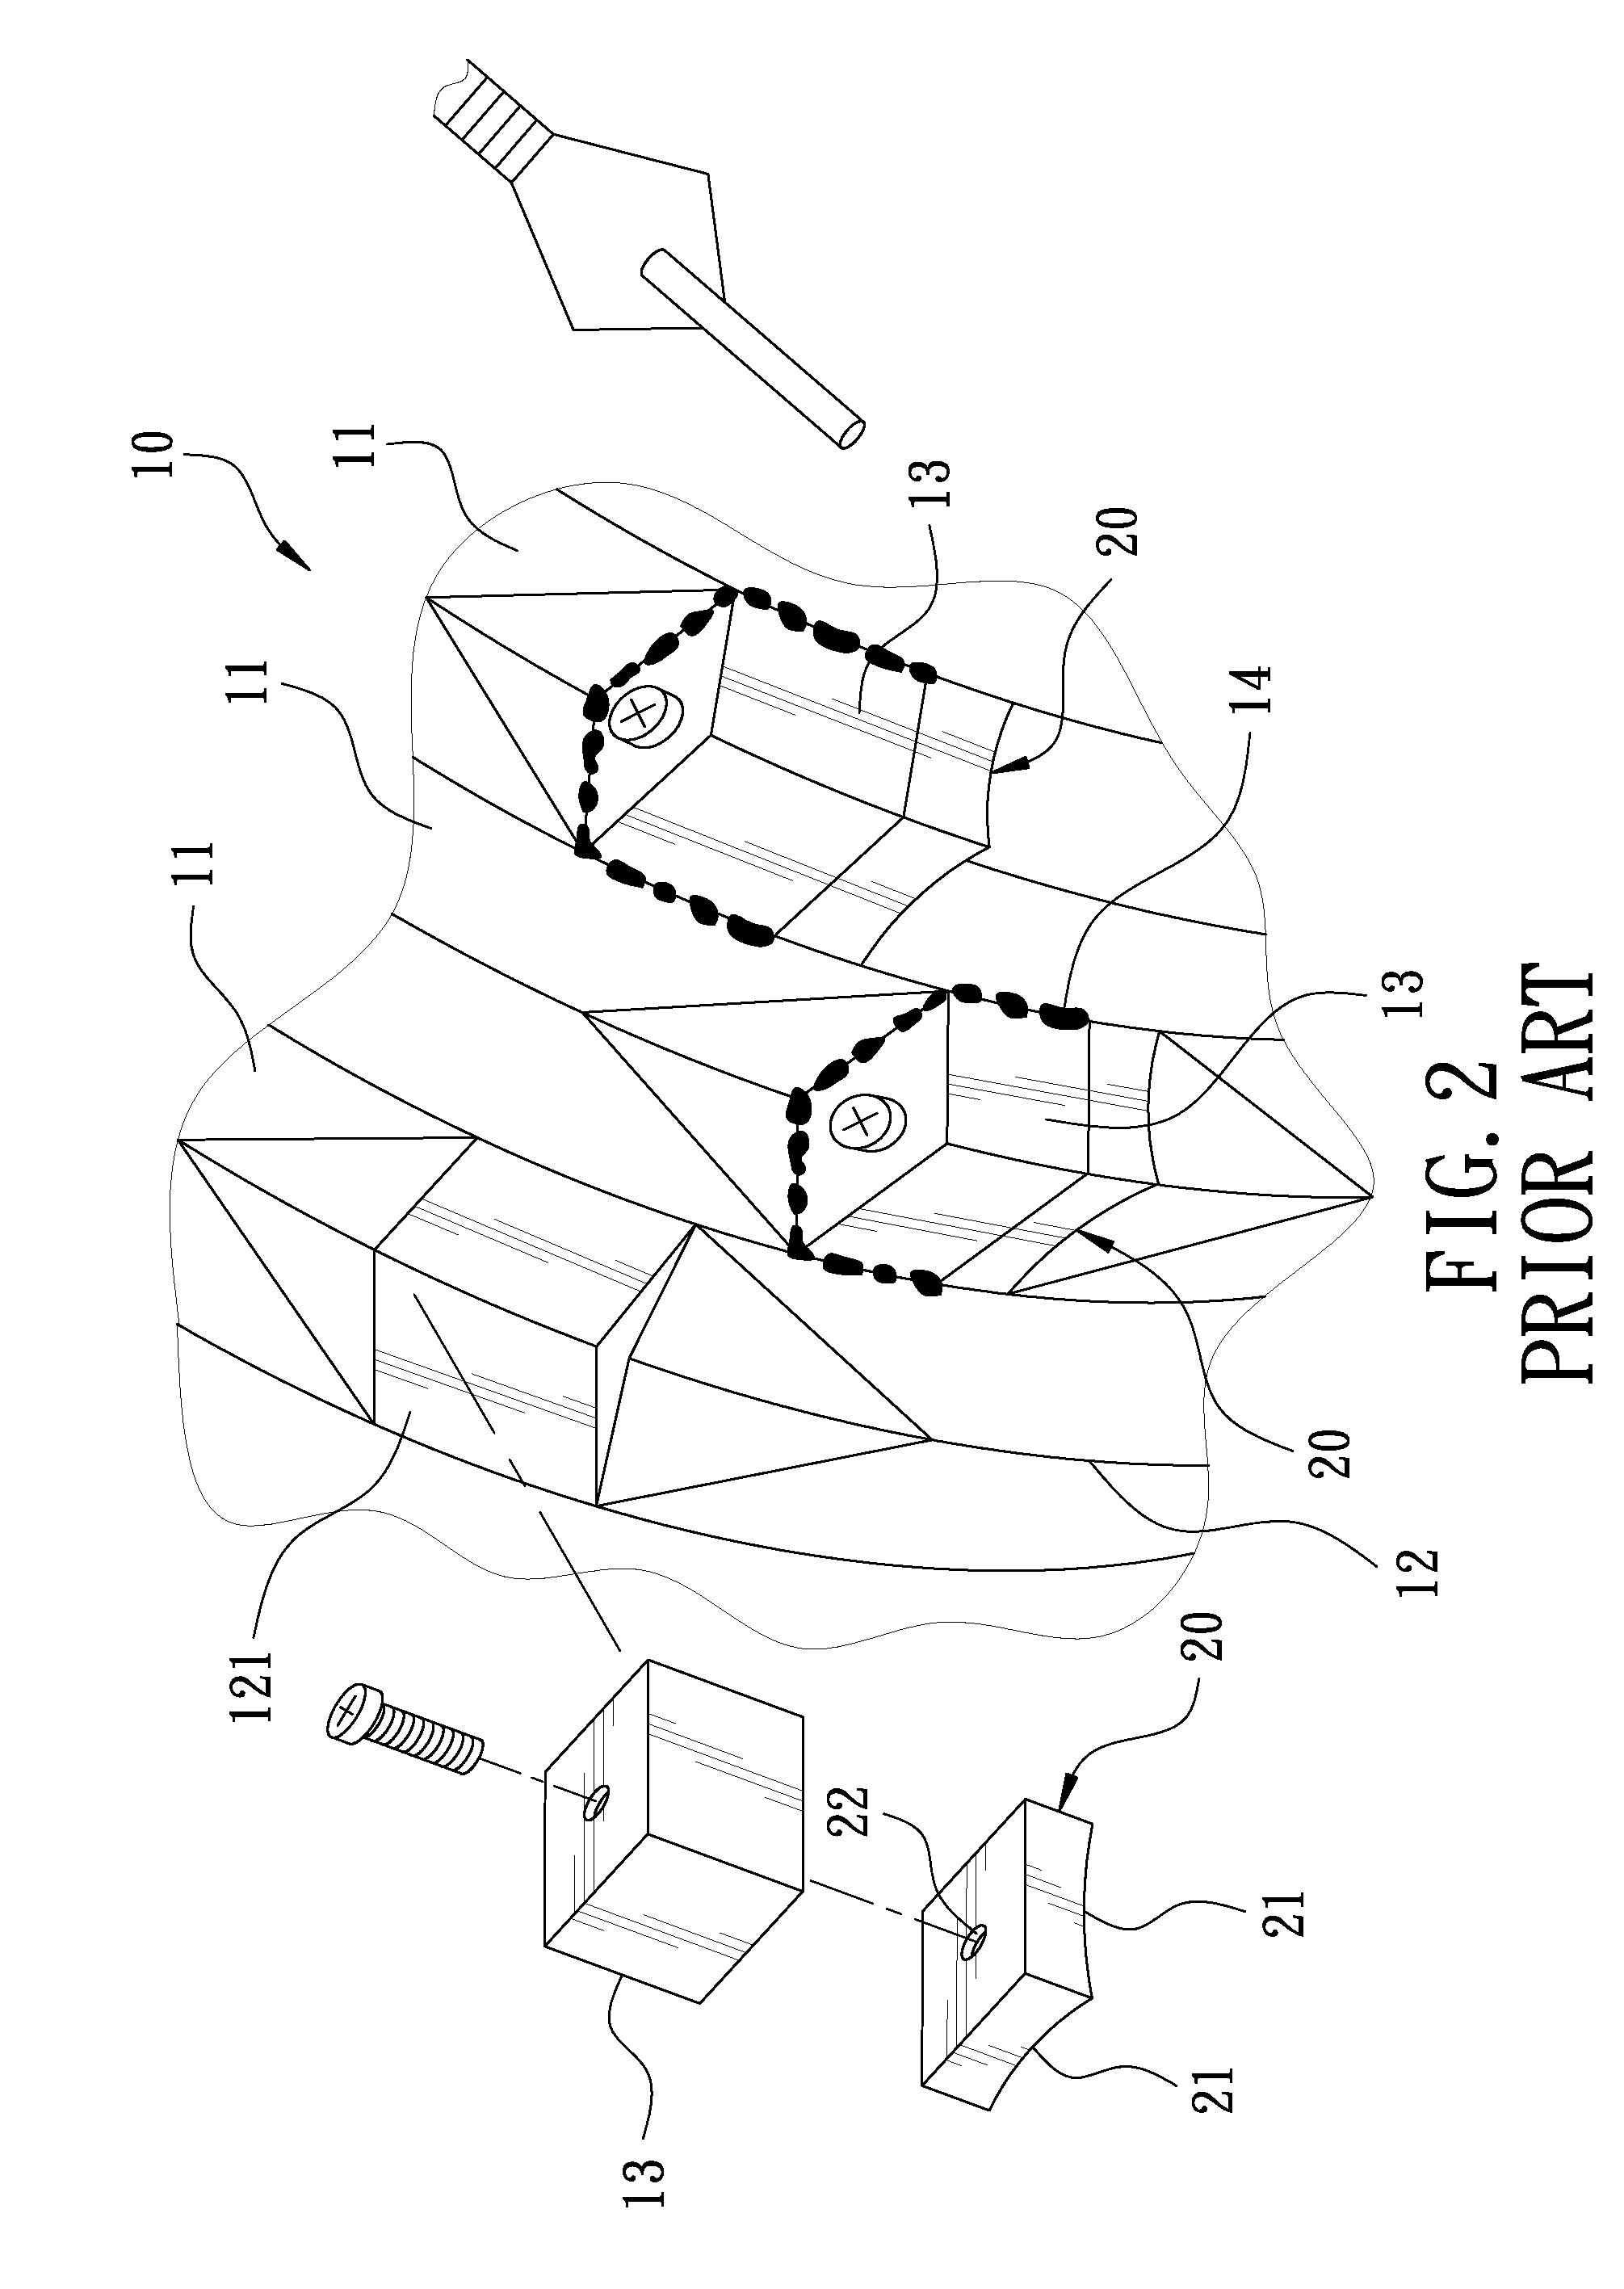 Cutter device for a crushing machine